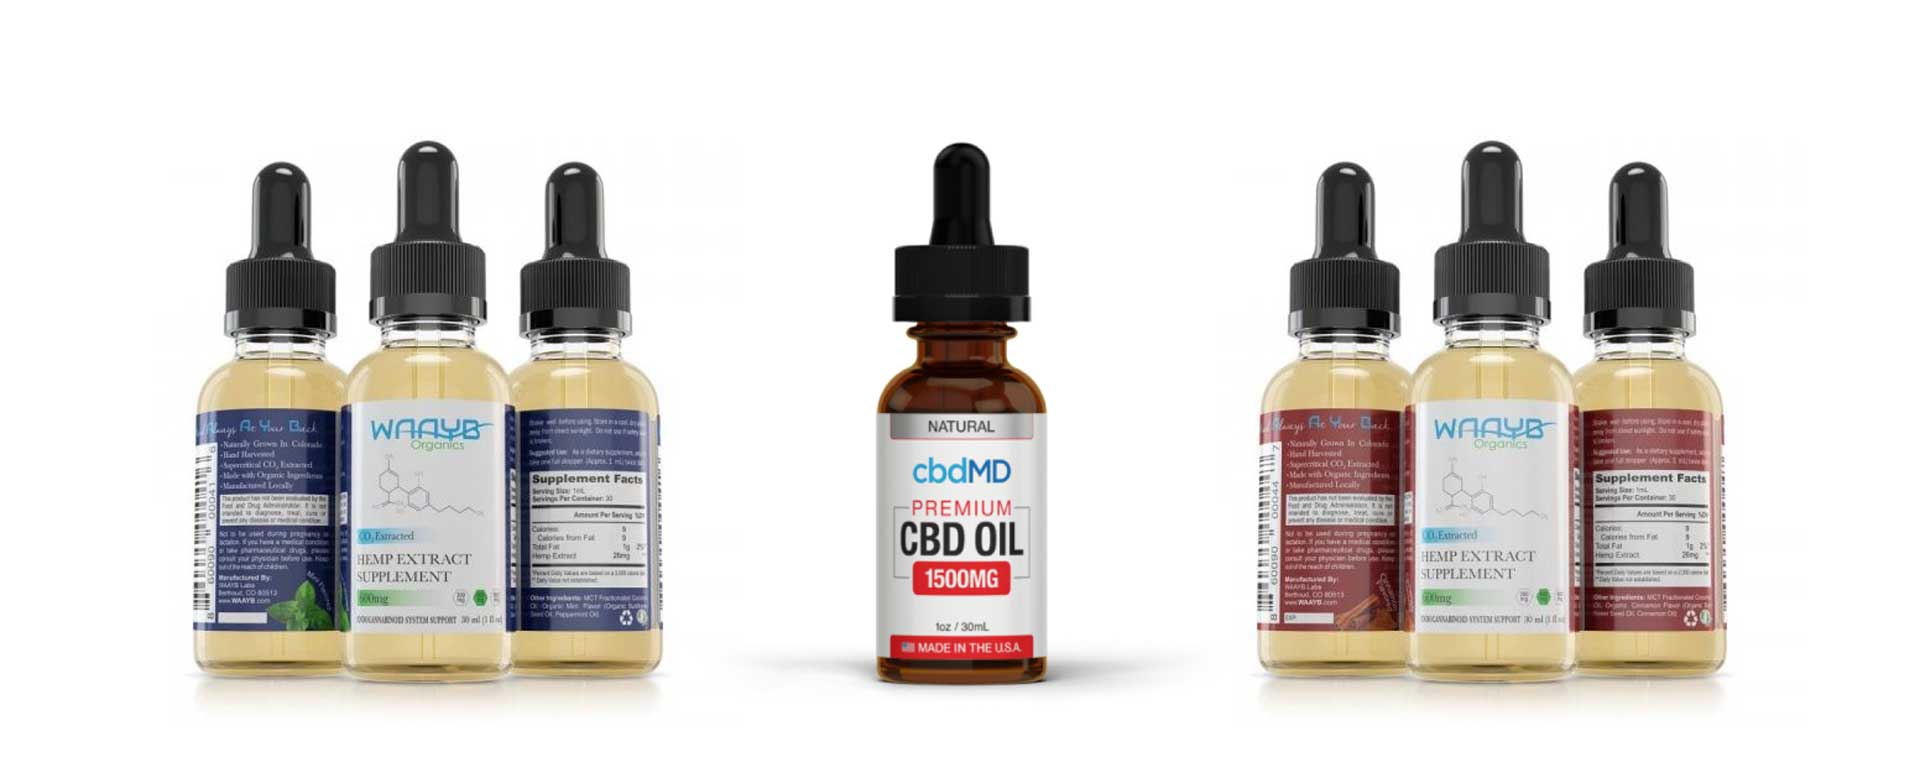 Our wide selection of CBD products